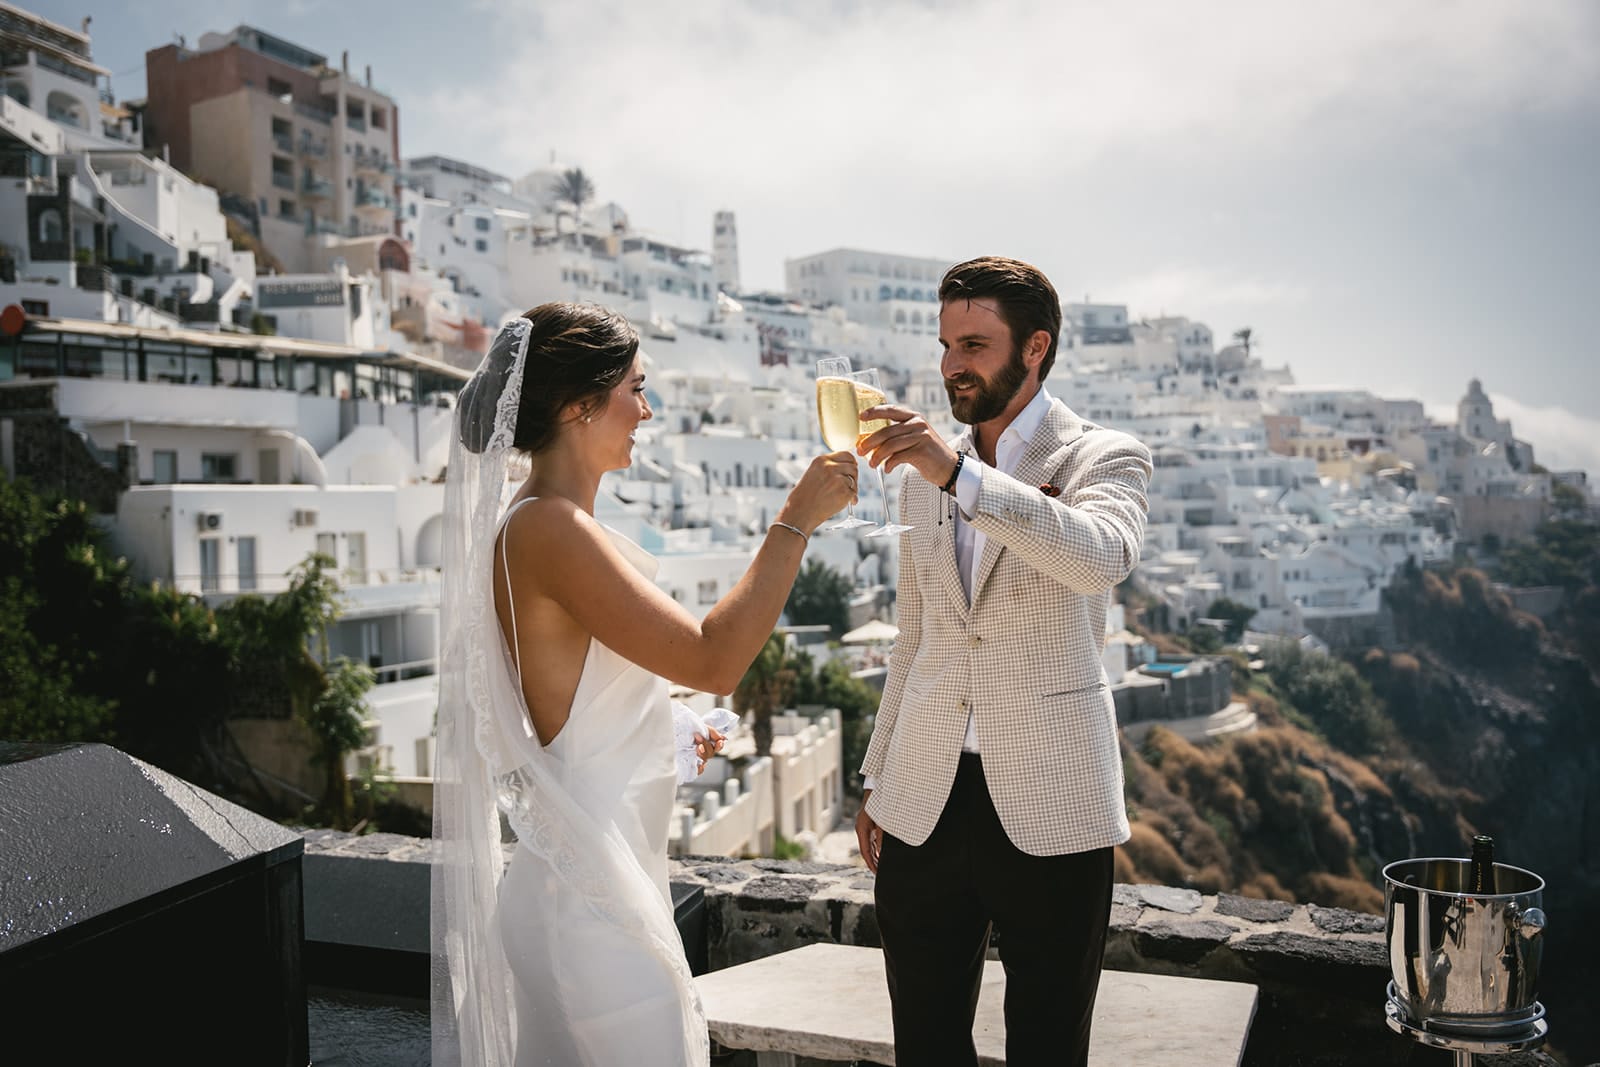 Champagne toasts by the pool, celebrating the start of their forever in Fira’s embrace